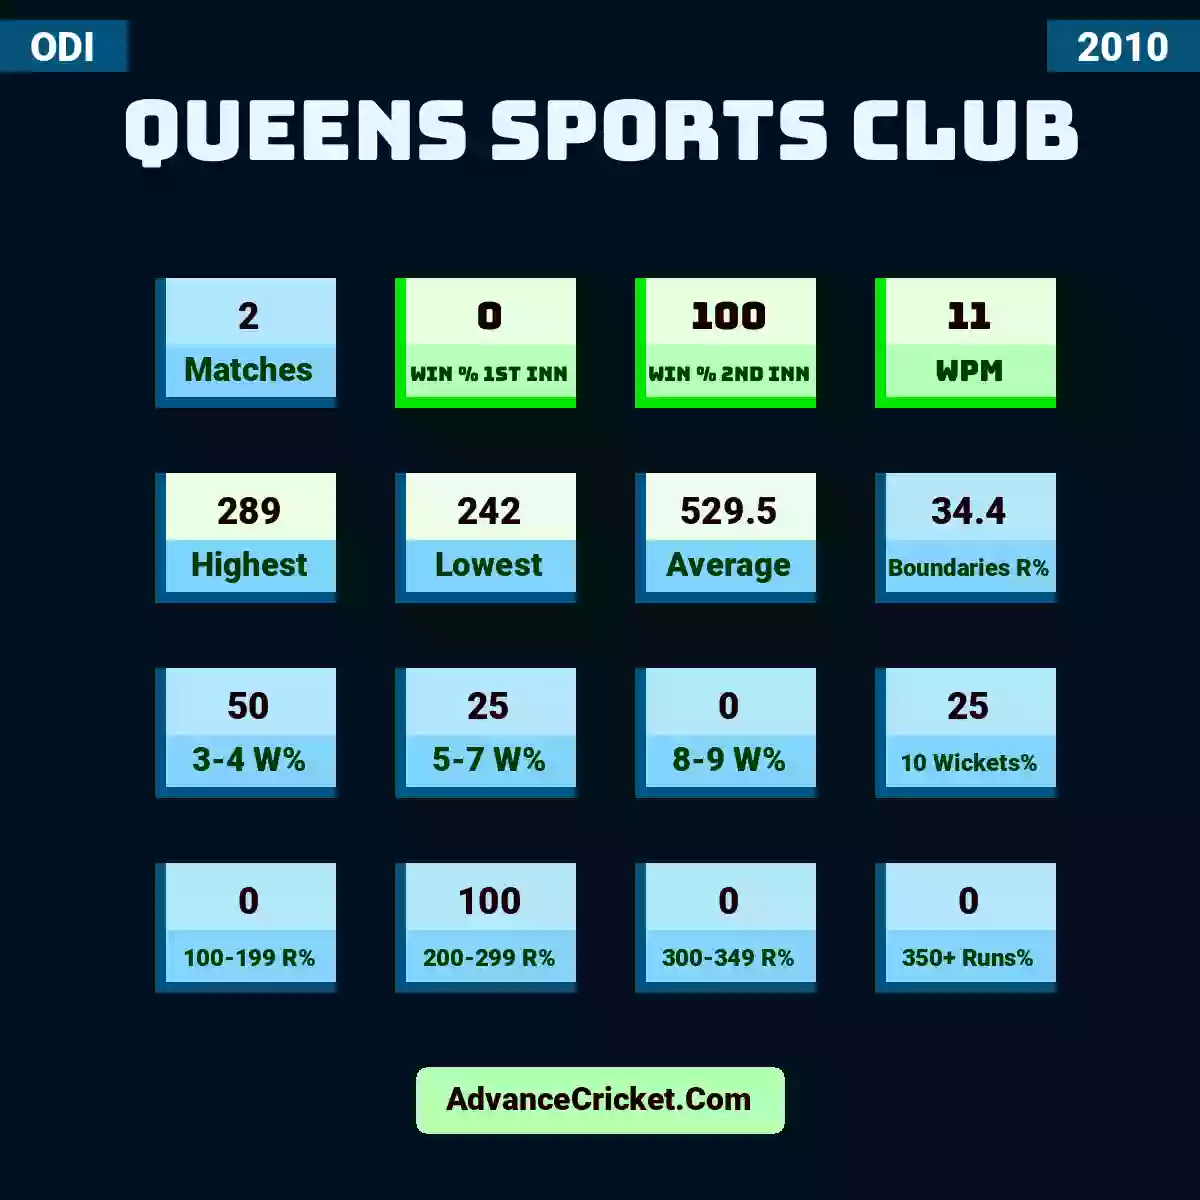 Image showing Queens Sports Club with Matches: 2, Win % 1st Inn: 0, Win % 2nd Inn: 100, WPM: 11, Highest: 289, Lowest: 242, Average: 529.5, Boundaries R%: 34.4, 3-4 W%: 50, 5-7 W%: 25, 8-9 W%: 0, 10 Wickets%: 25, 100-199 R%: 0, 200-299 R%: 100, 300-349 R%: 0, 350+ Runs%: 0.